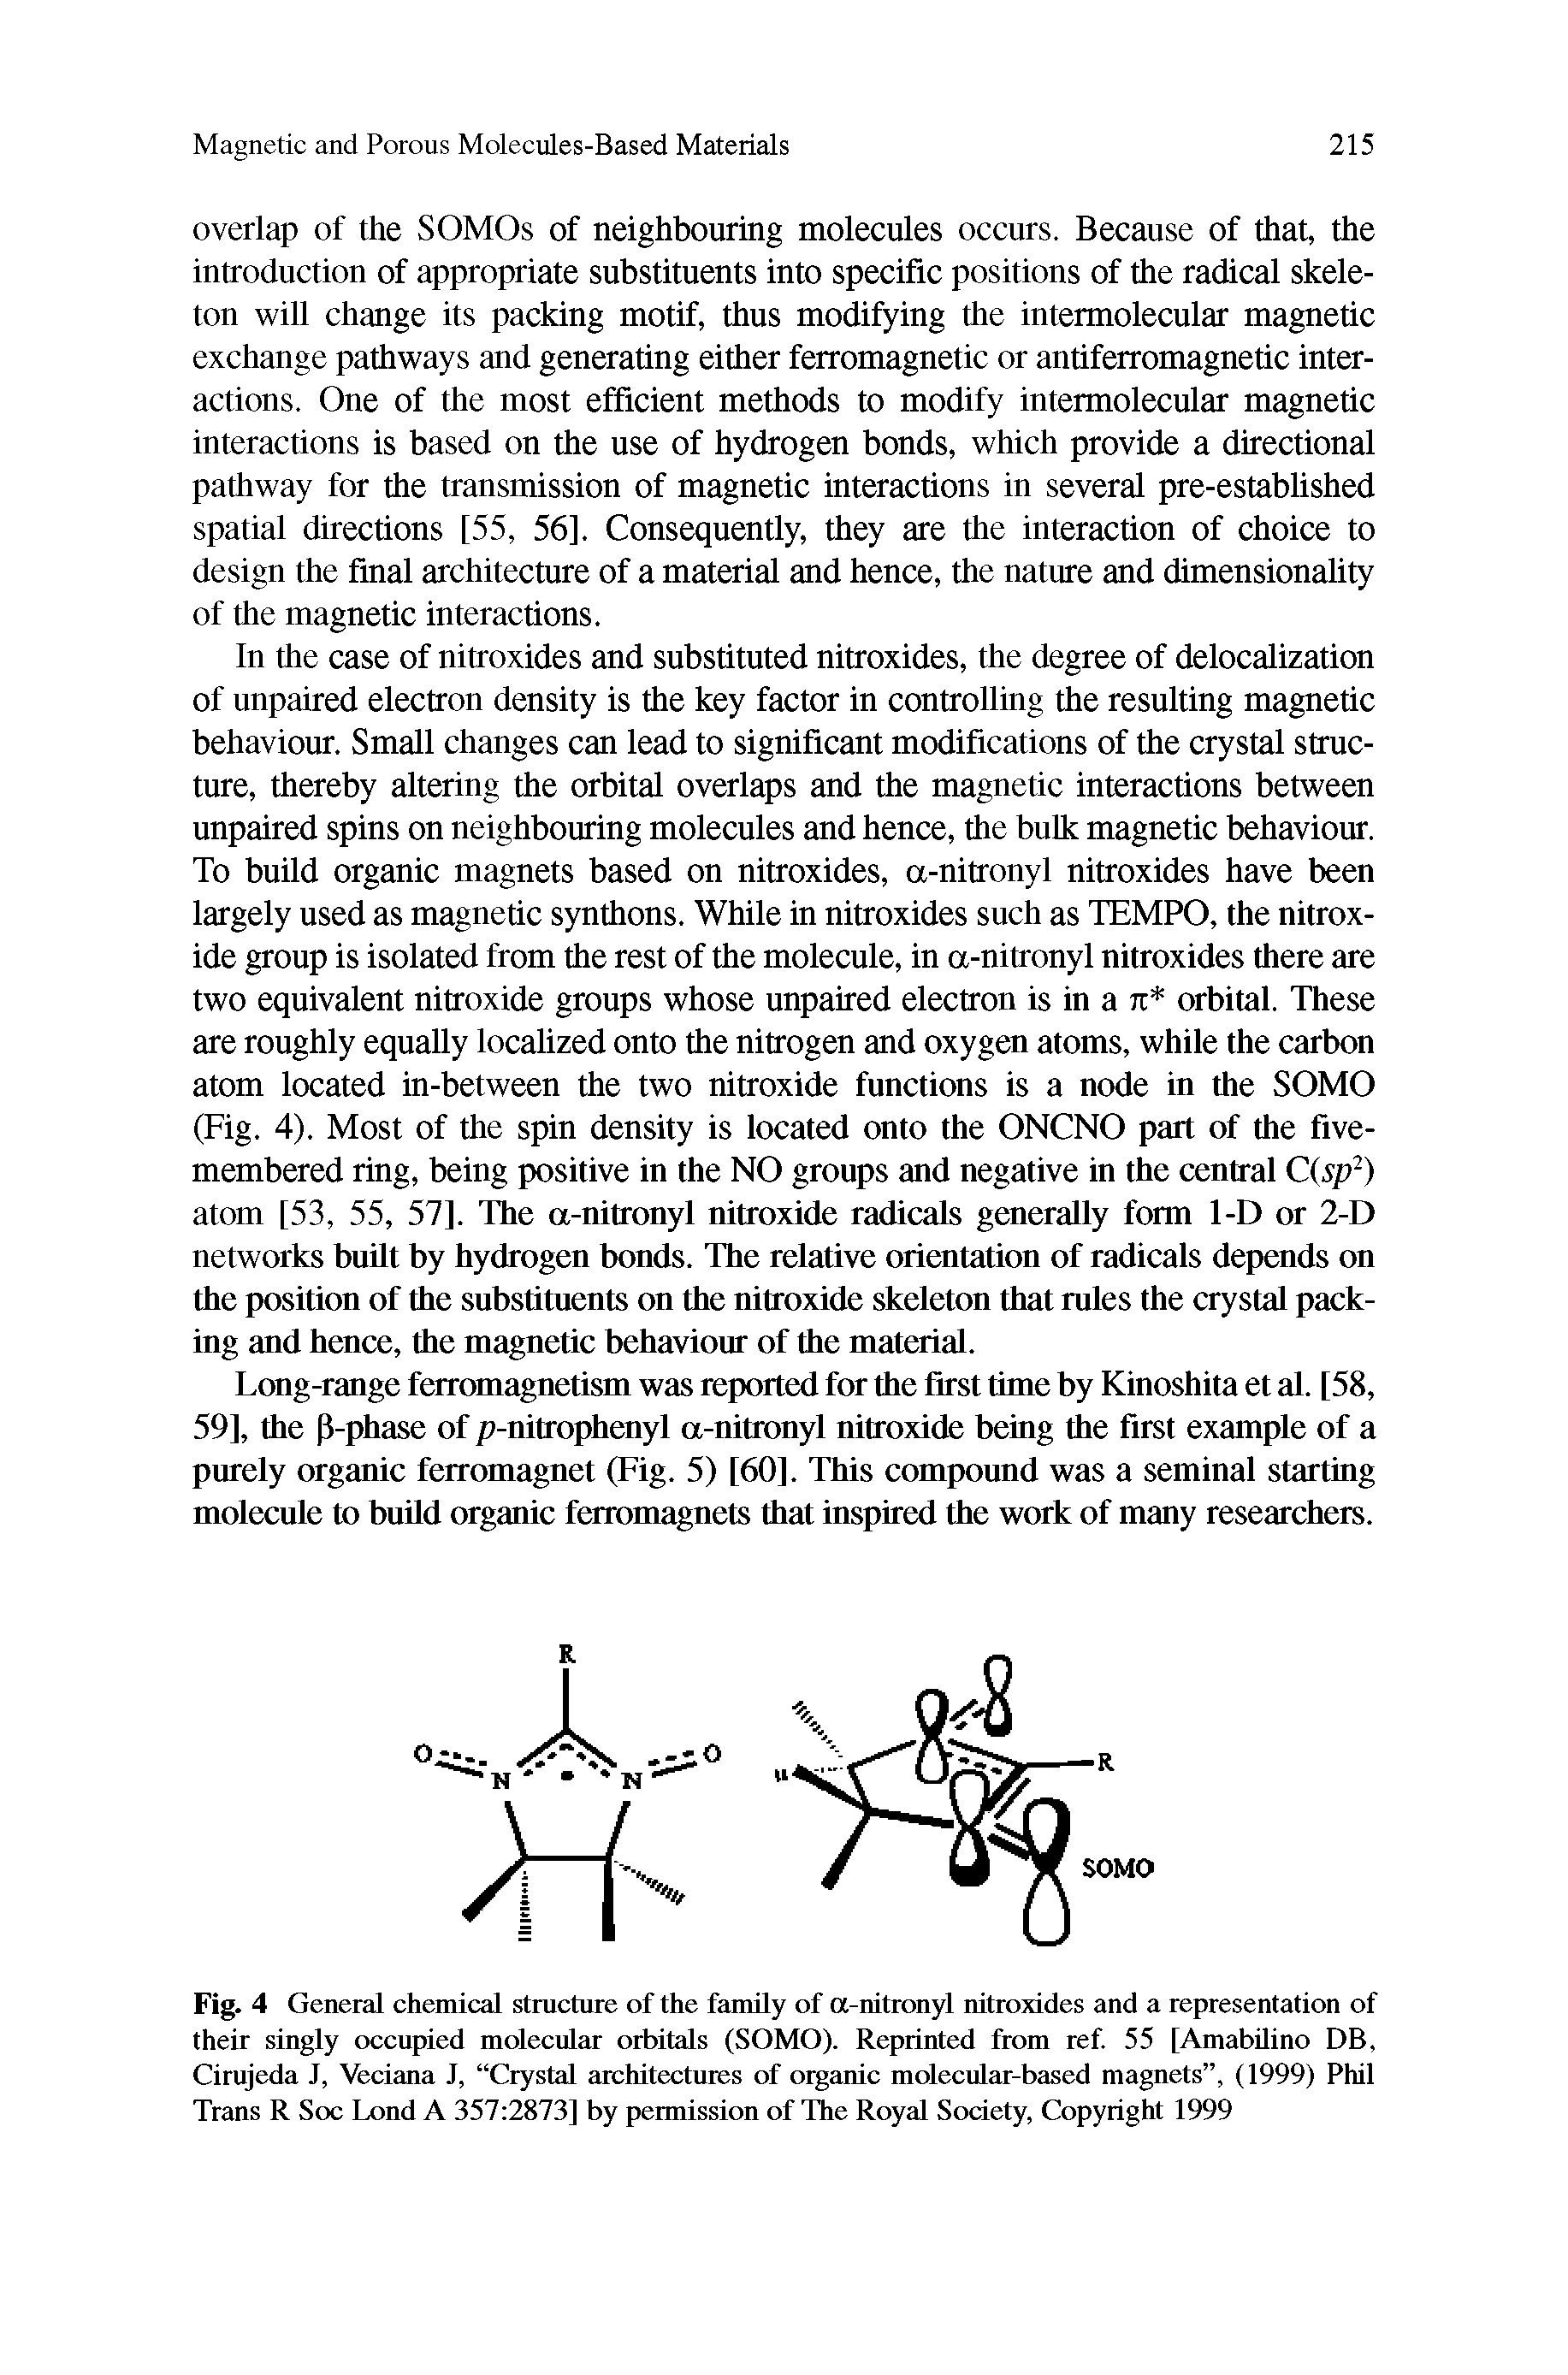 Fig. 4 General chemical structure of the family of a-nitronyl nitroxides and a representation of their singly occupied molecular orbitals (SOMO). Reprinted from ref 55 [AmabUino DB, Cirujeda 1, Veciana J, Crystal architectures of organic molecular-based magnets , (1999) Phil Trans R Soc Lond A 357 2873] by permission of The Royal Society, Copyright 1999...